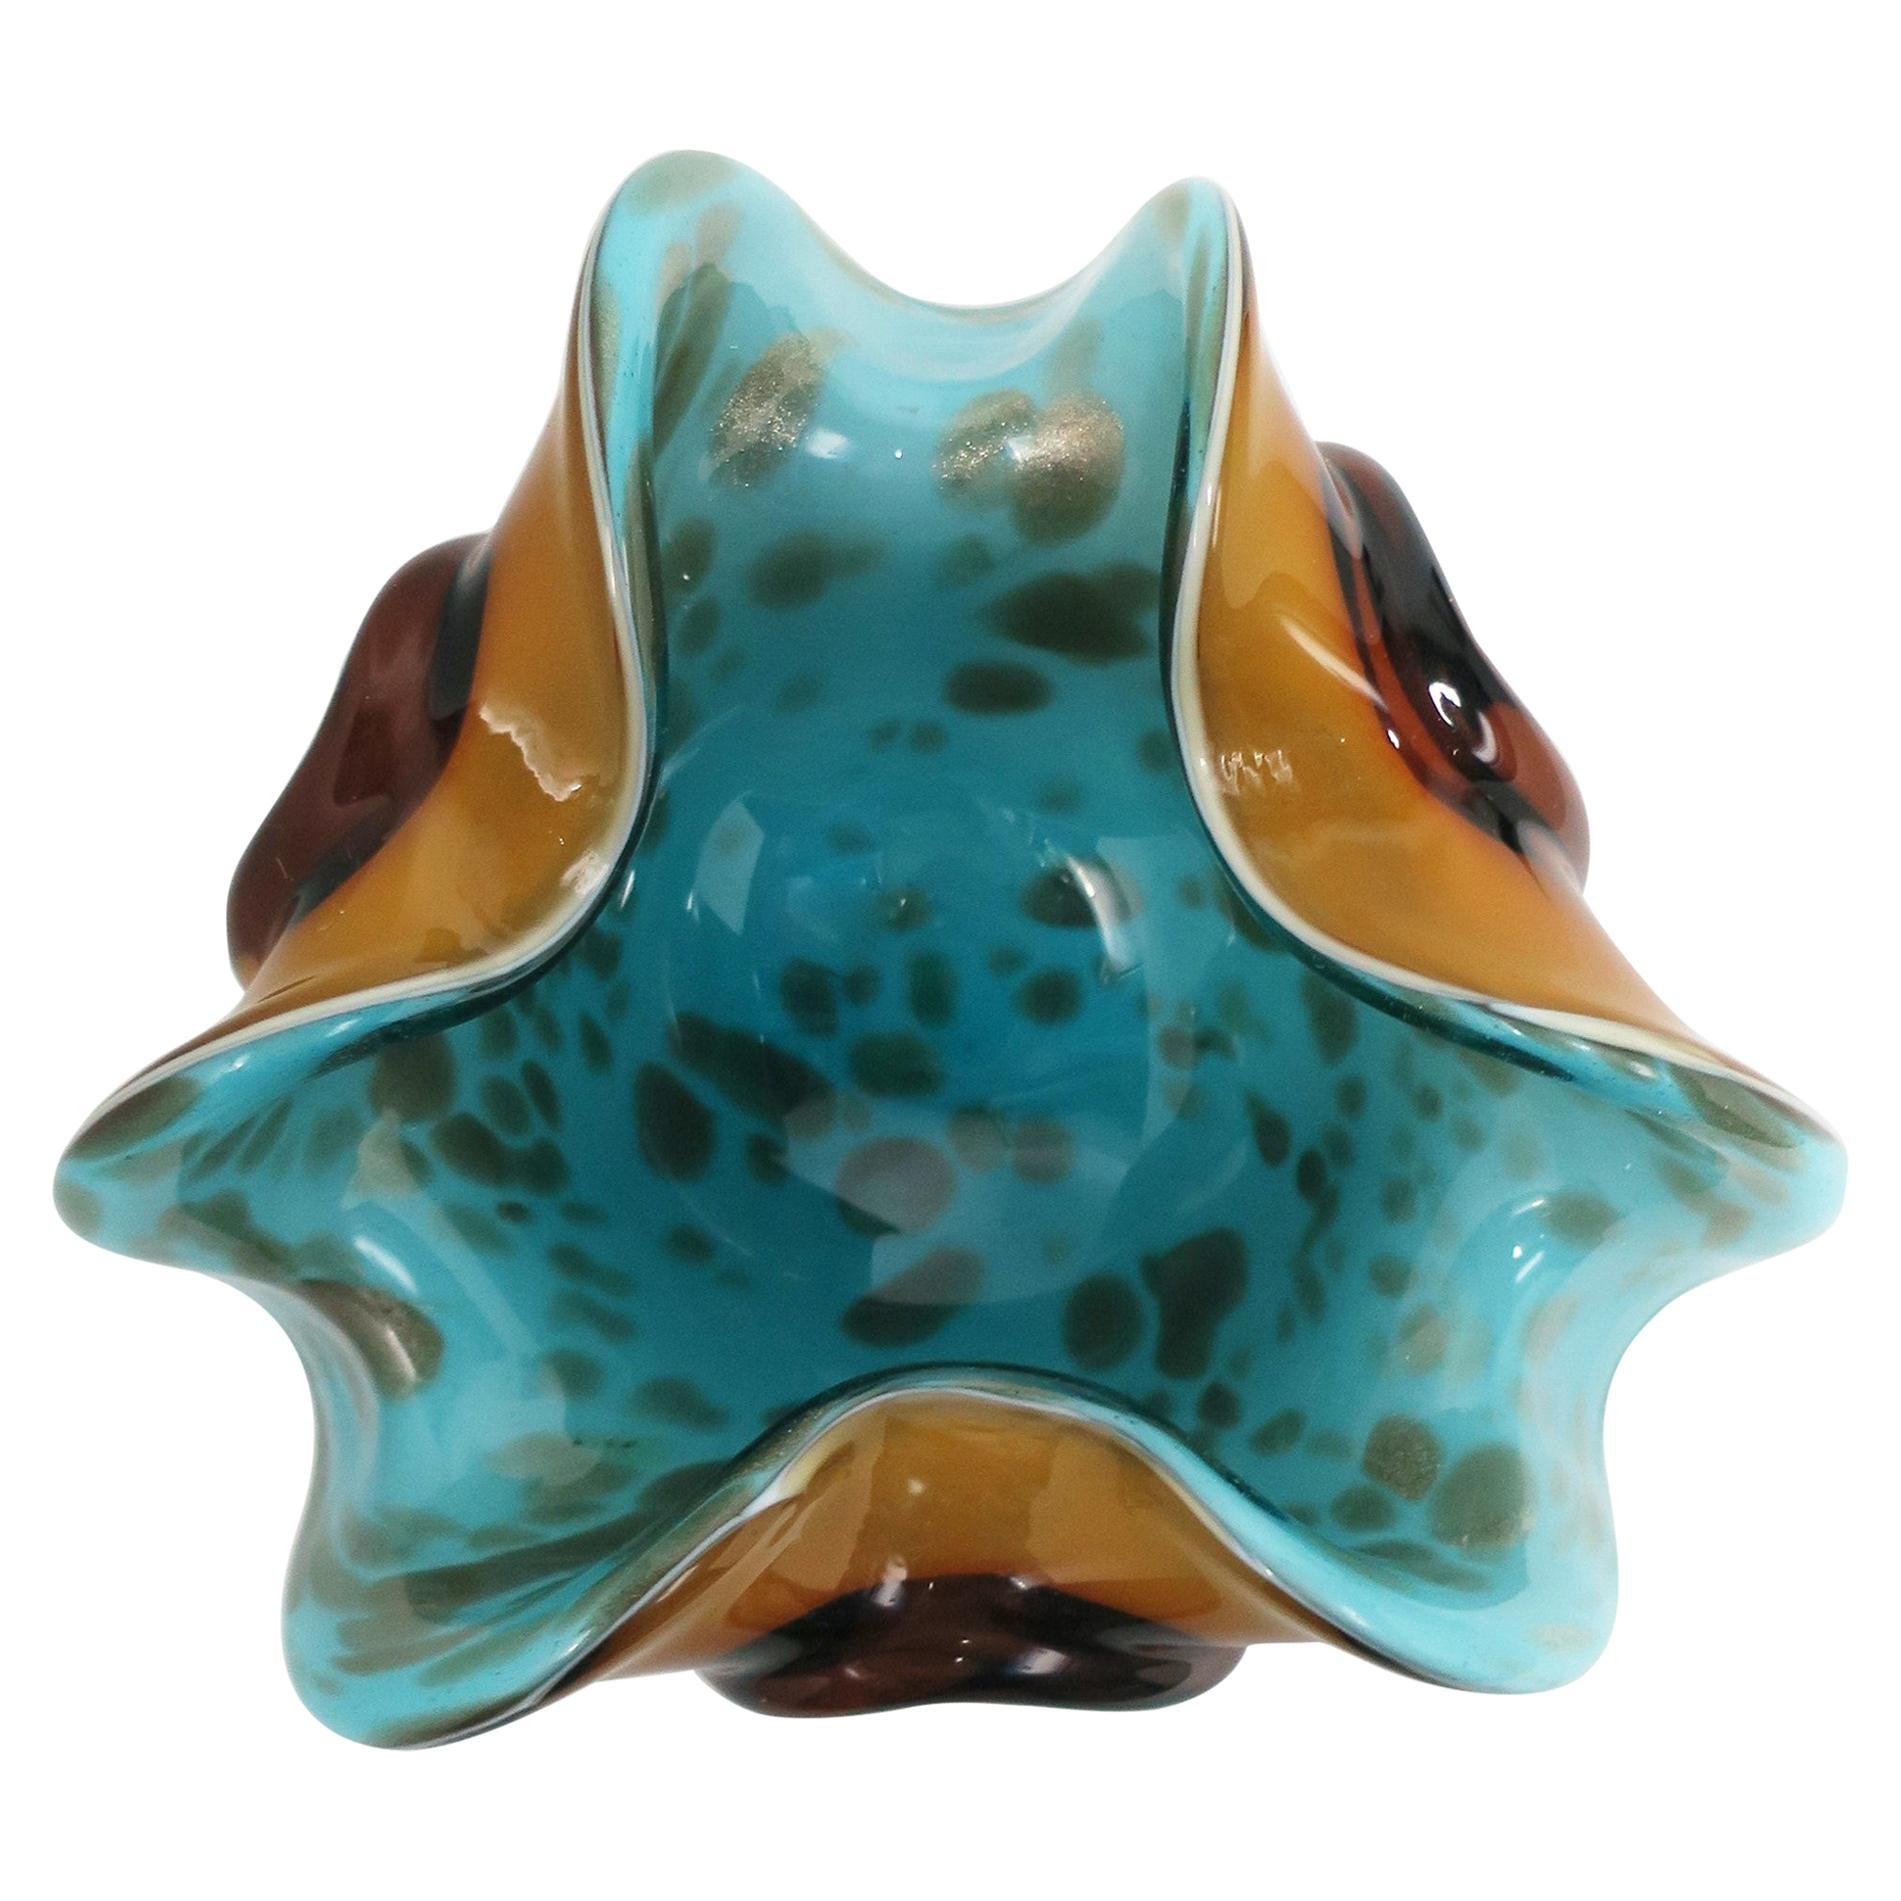 Italian Murano Art Glass Bowl in Turquoise Blue and Gold, circa 1960s